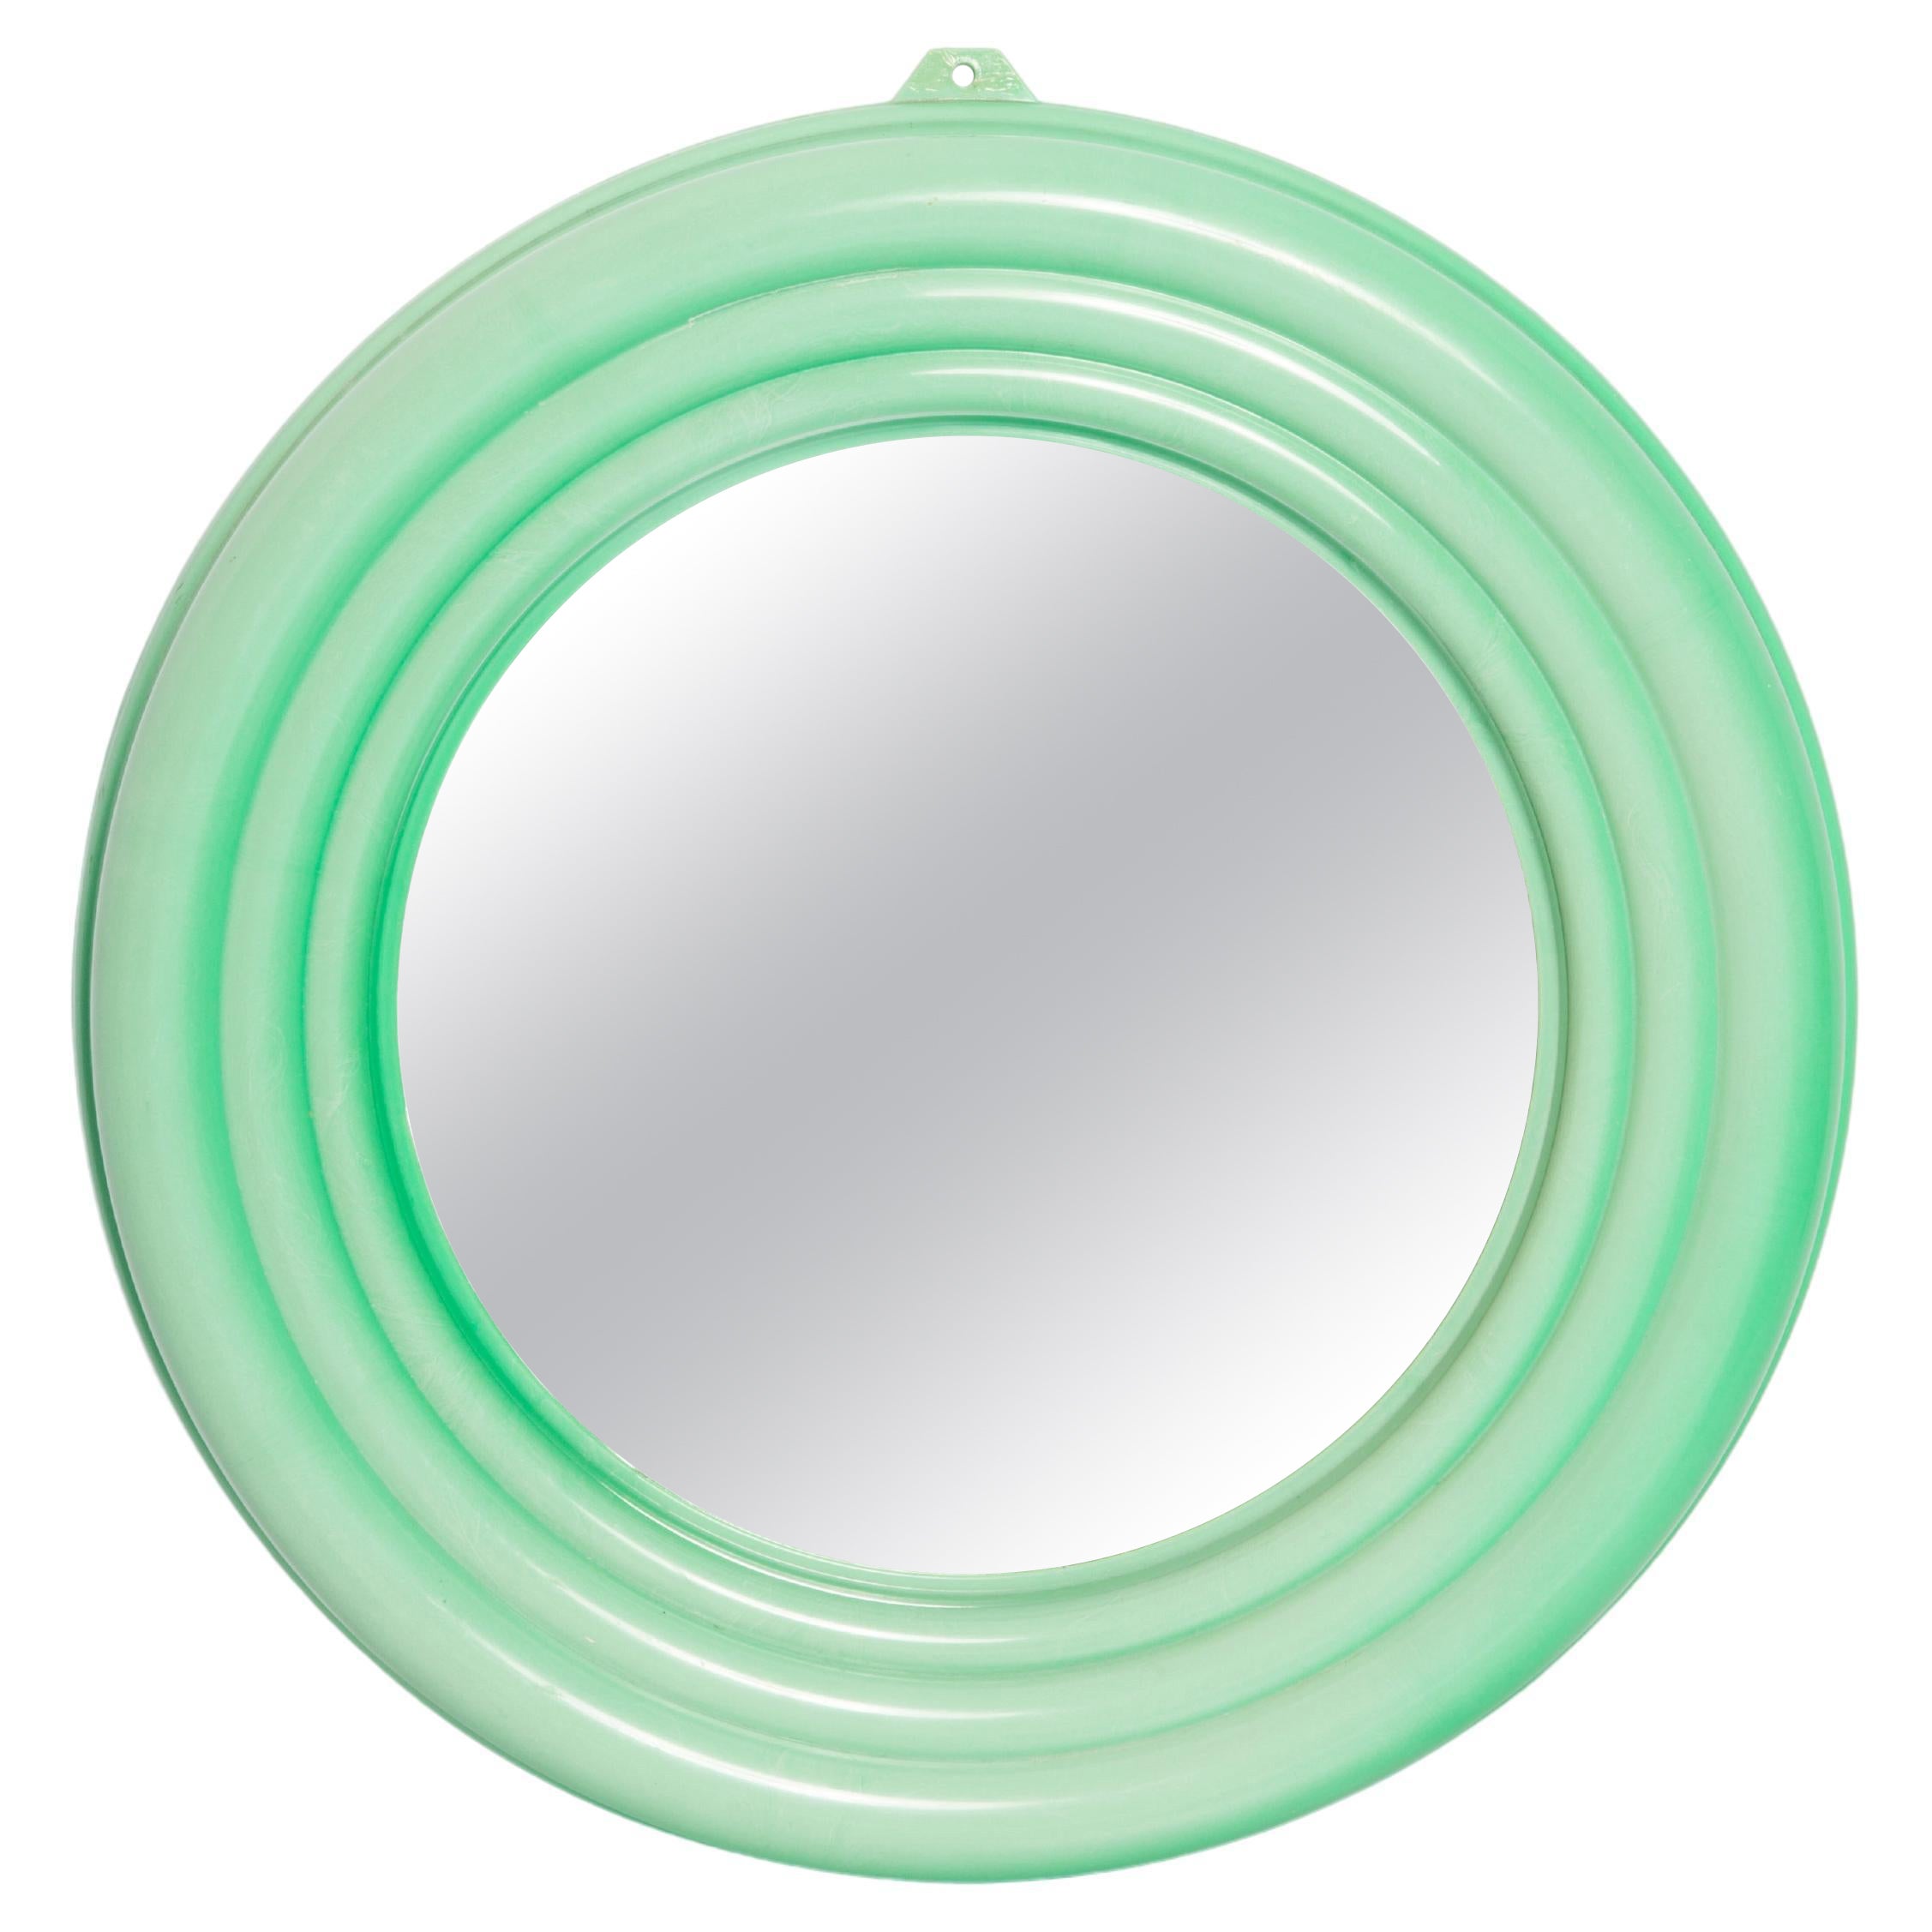 French Wall Decor Vintage Plastic Wall Mirror 70s Mid-Century Round Mirror